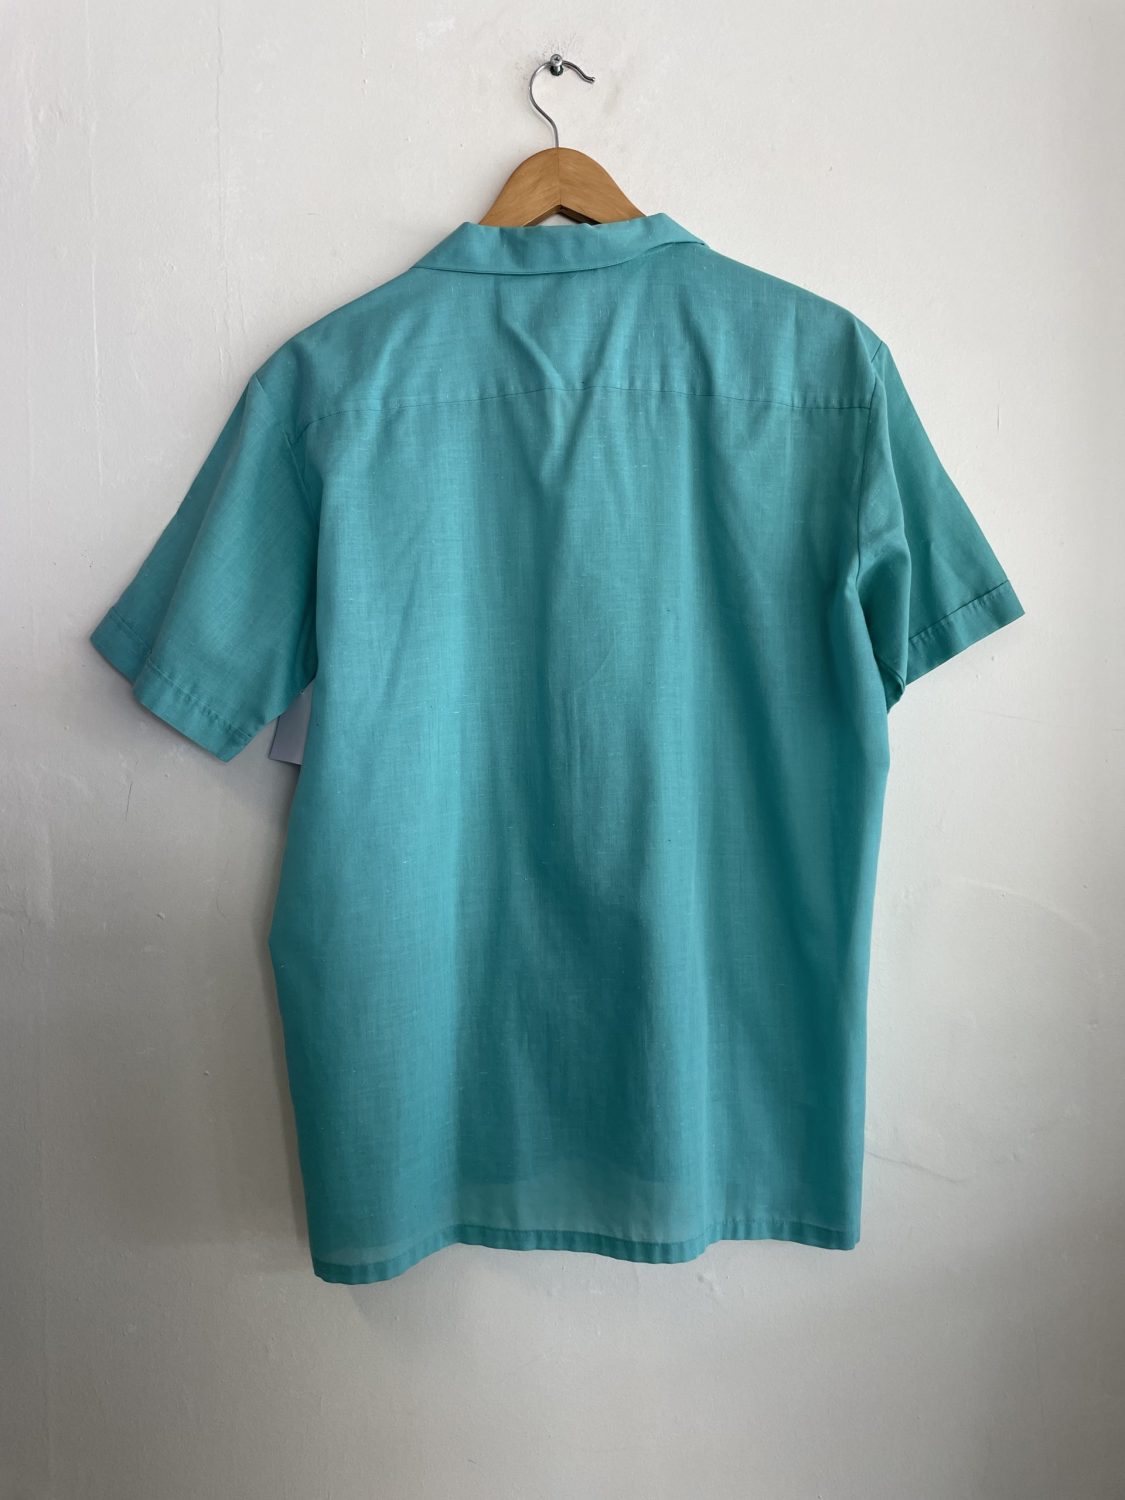 'CLUB COLLECTION' 70's TEAL S/S SHIRT | Chaos Bazaar Vintage